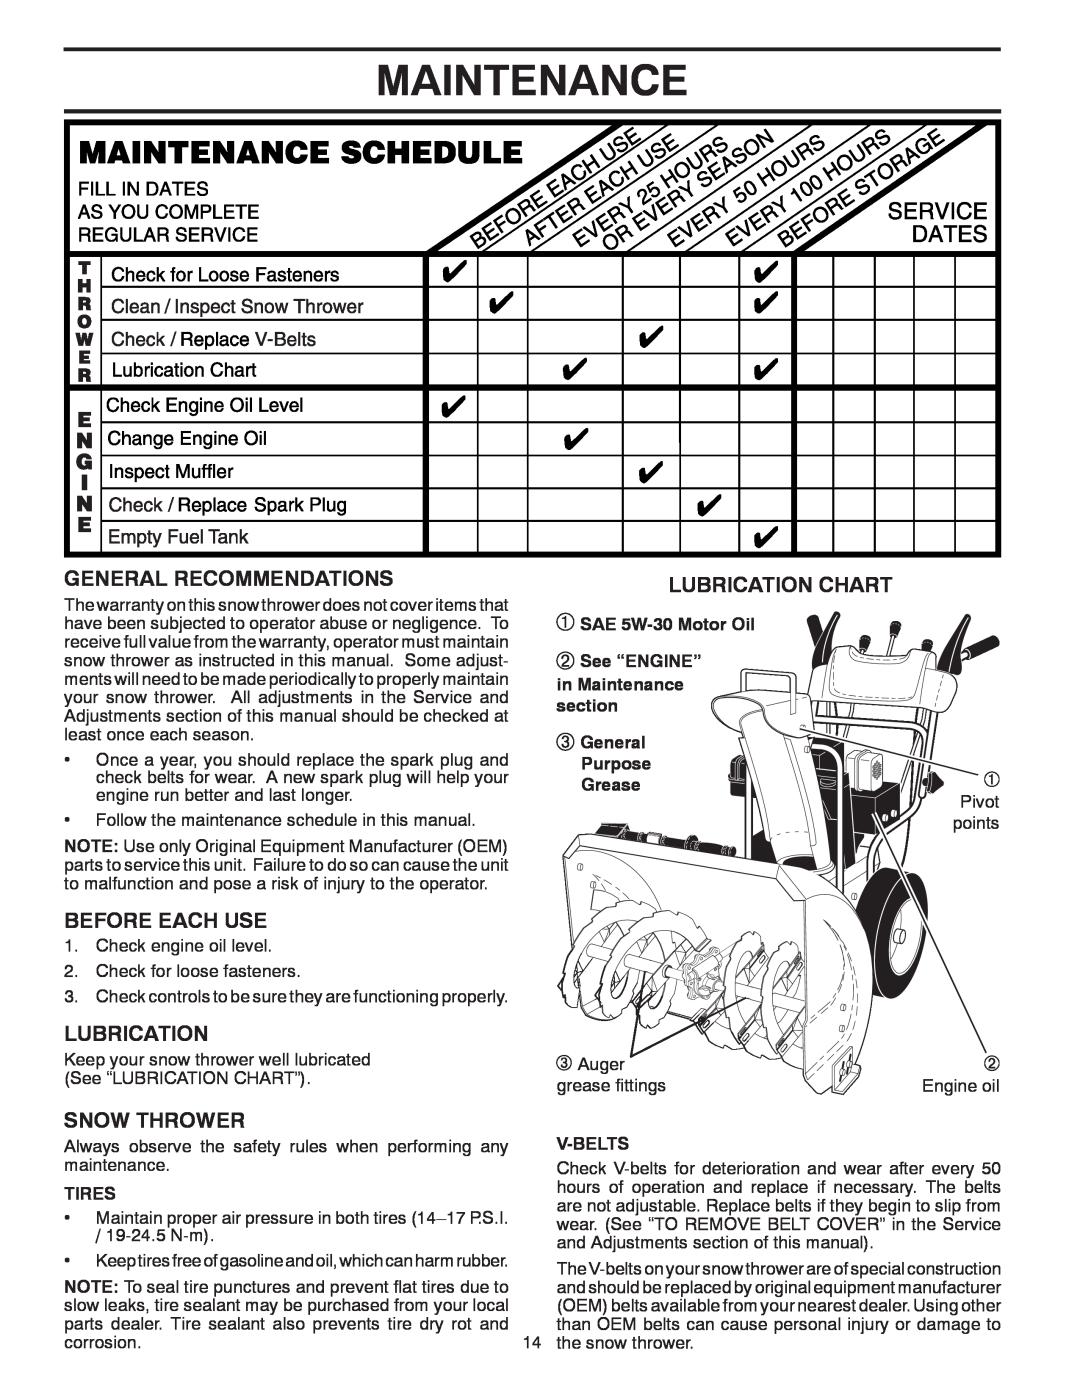 Poulan 421104 owner manual Maintenance, General Recommendations, Before Each Use, Lubrication Chart, Snow Thrower 